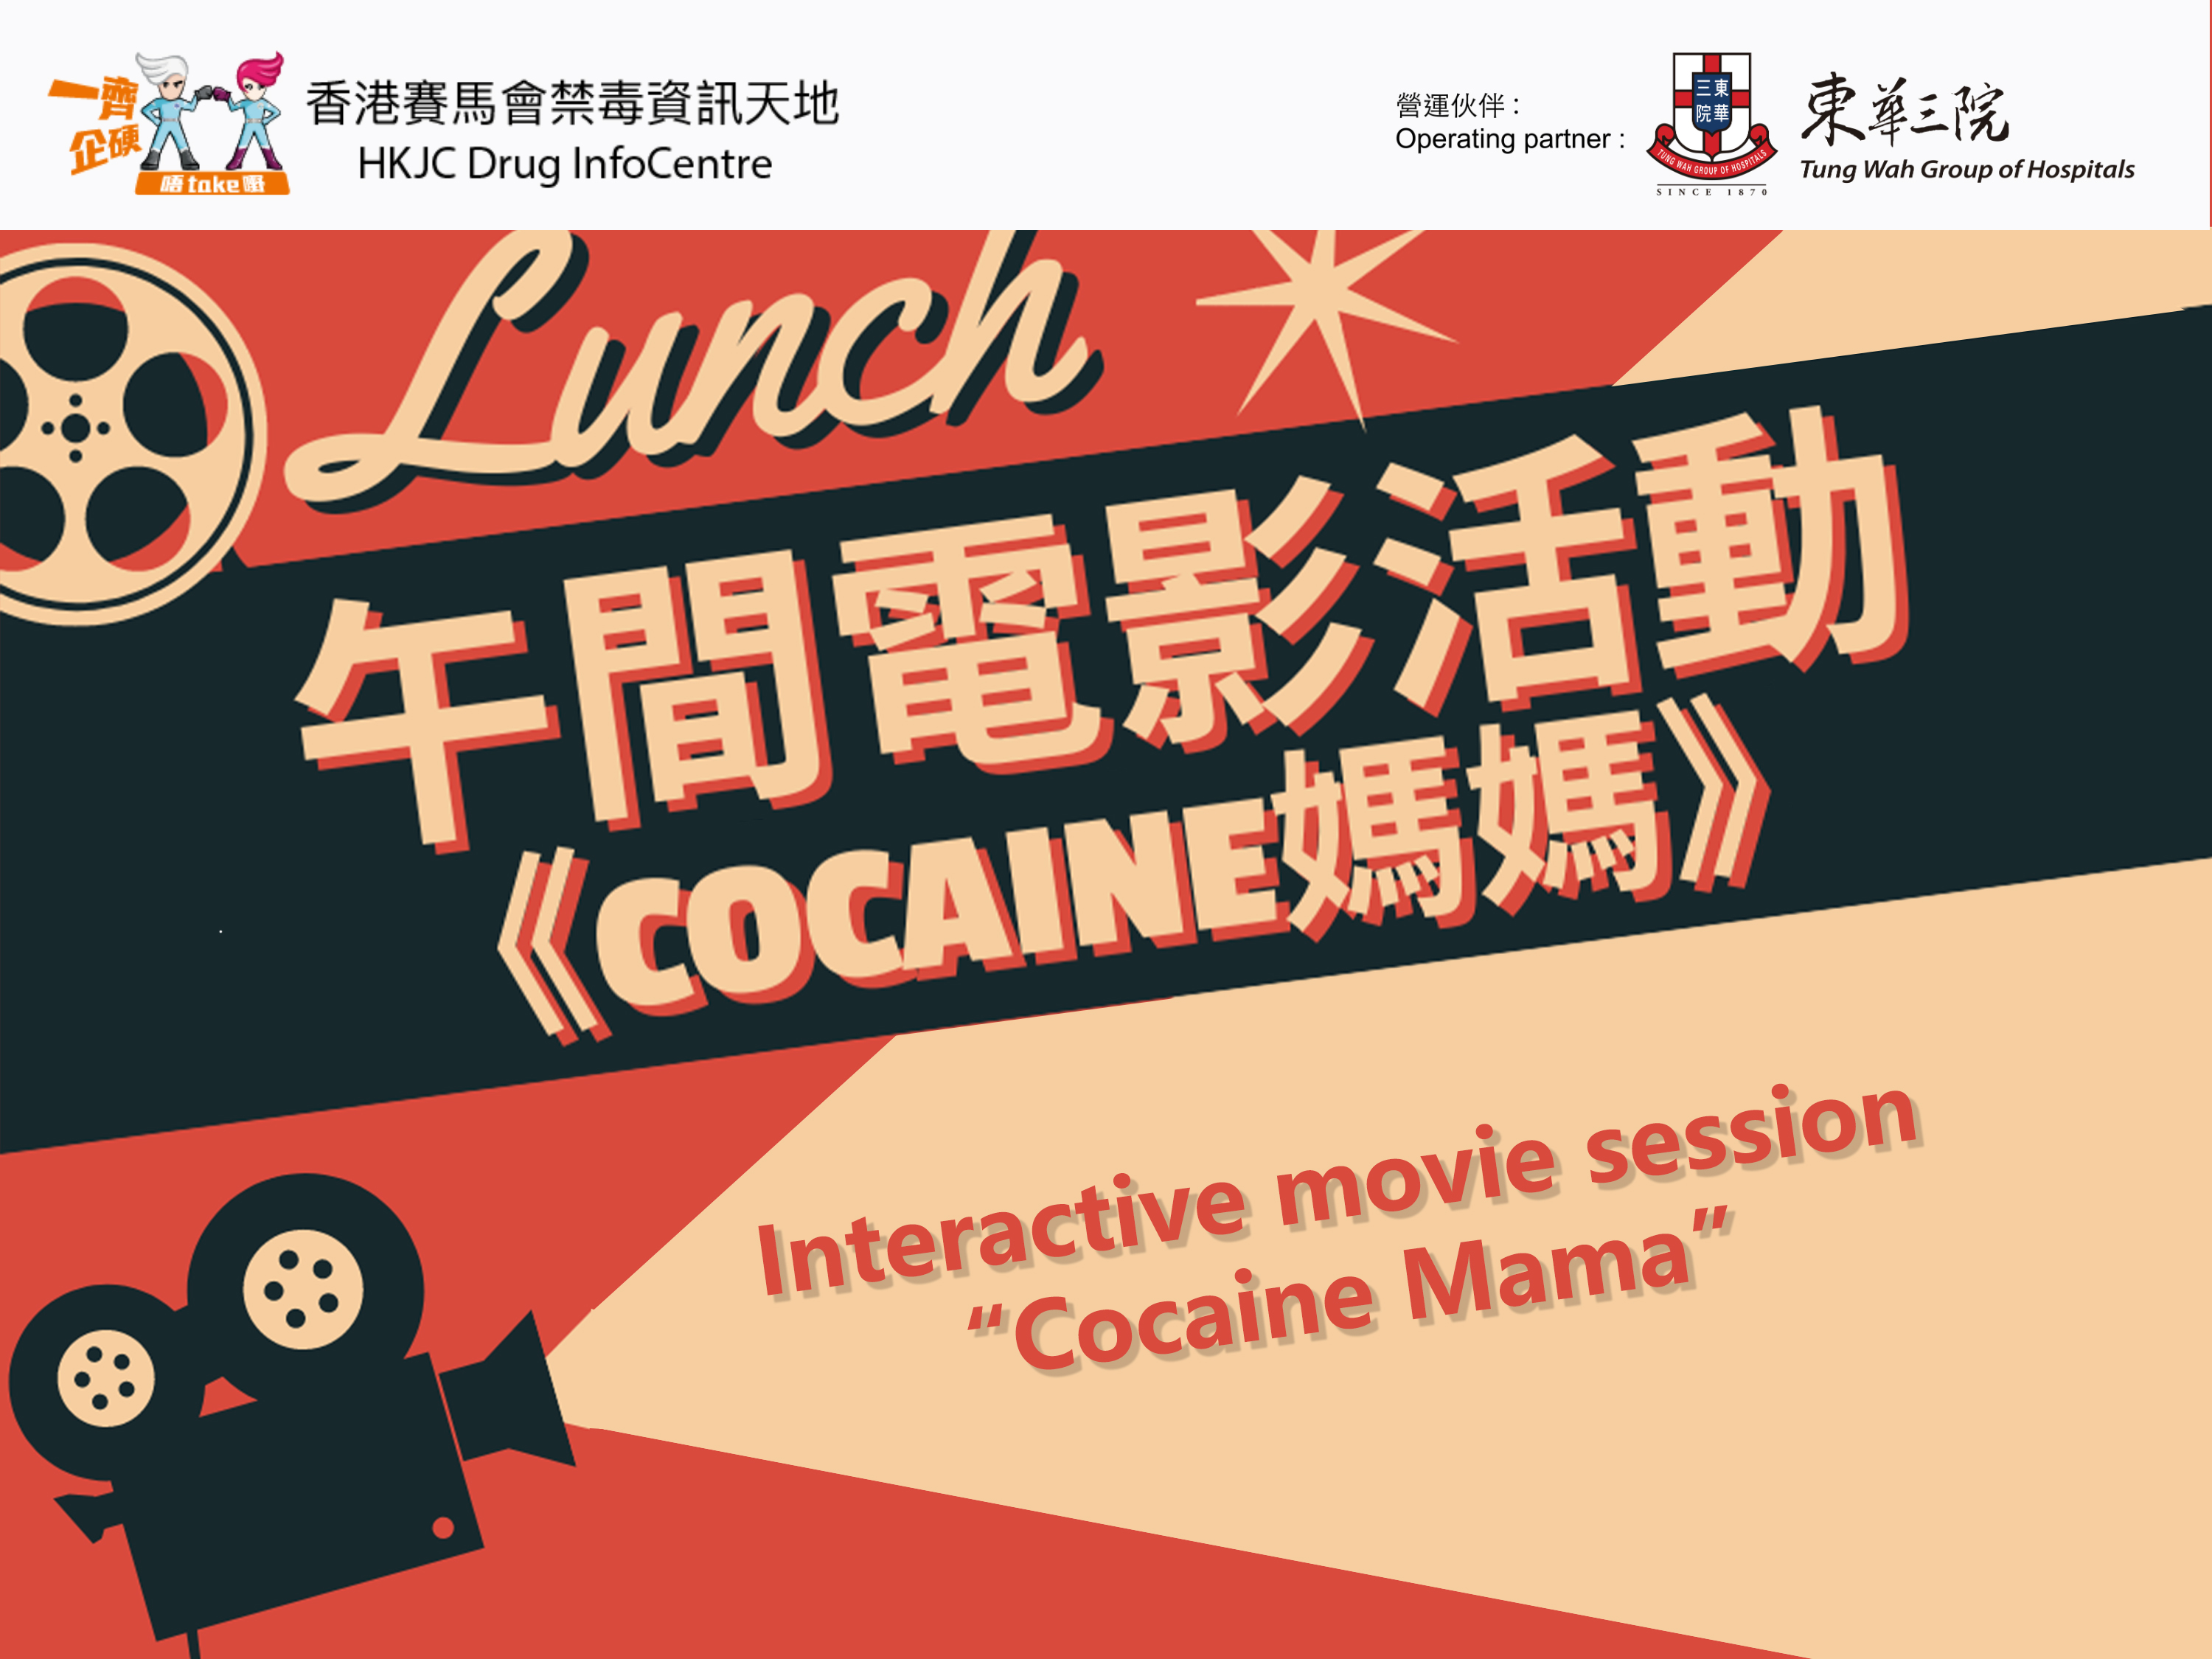 Lunchtime Movie Time - “Cocaine Mama”